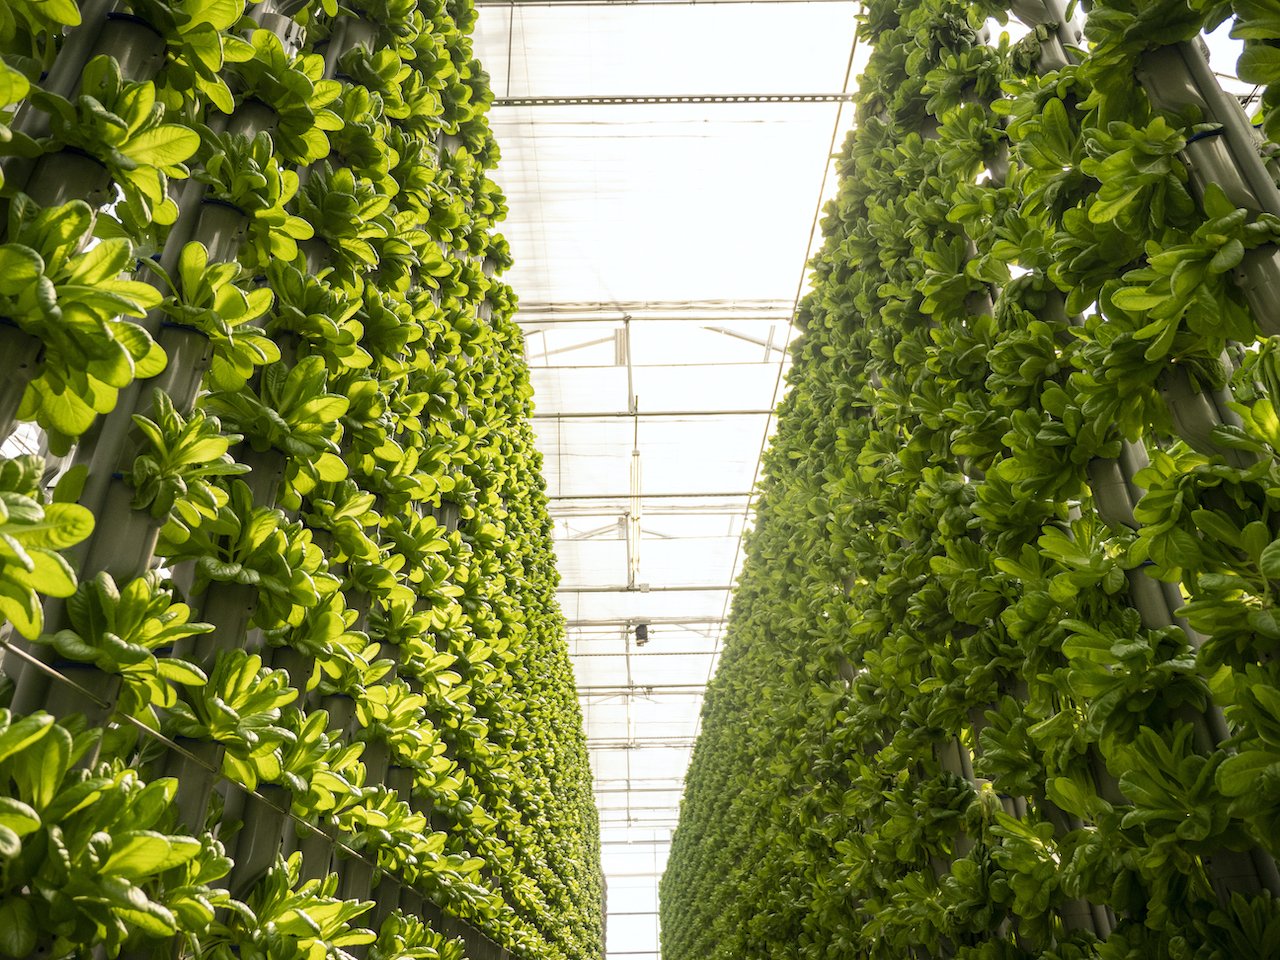 A vertical hydroponic wall of leafy greens in an Eden Green greenhouse